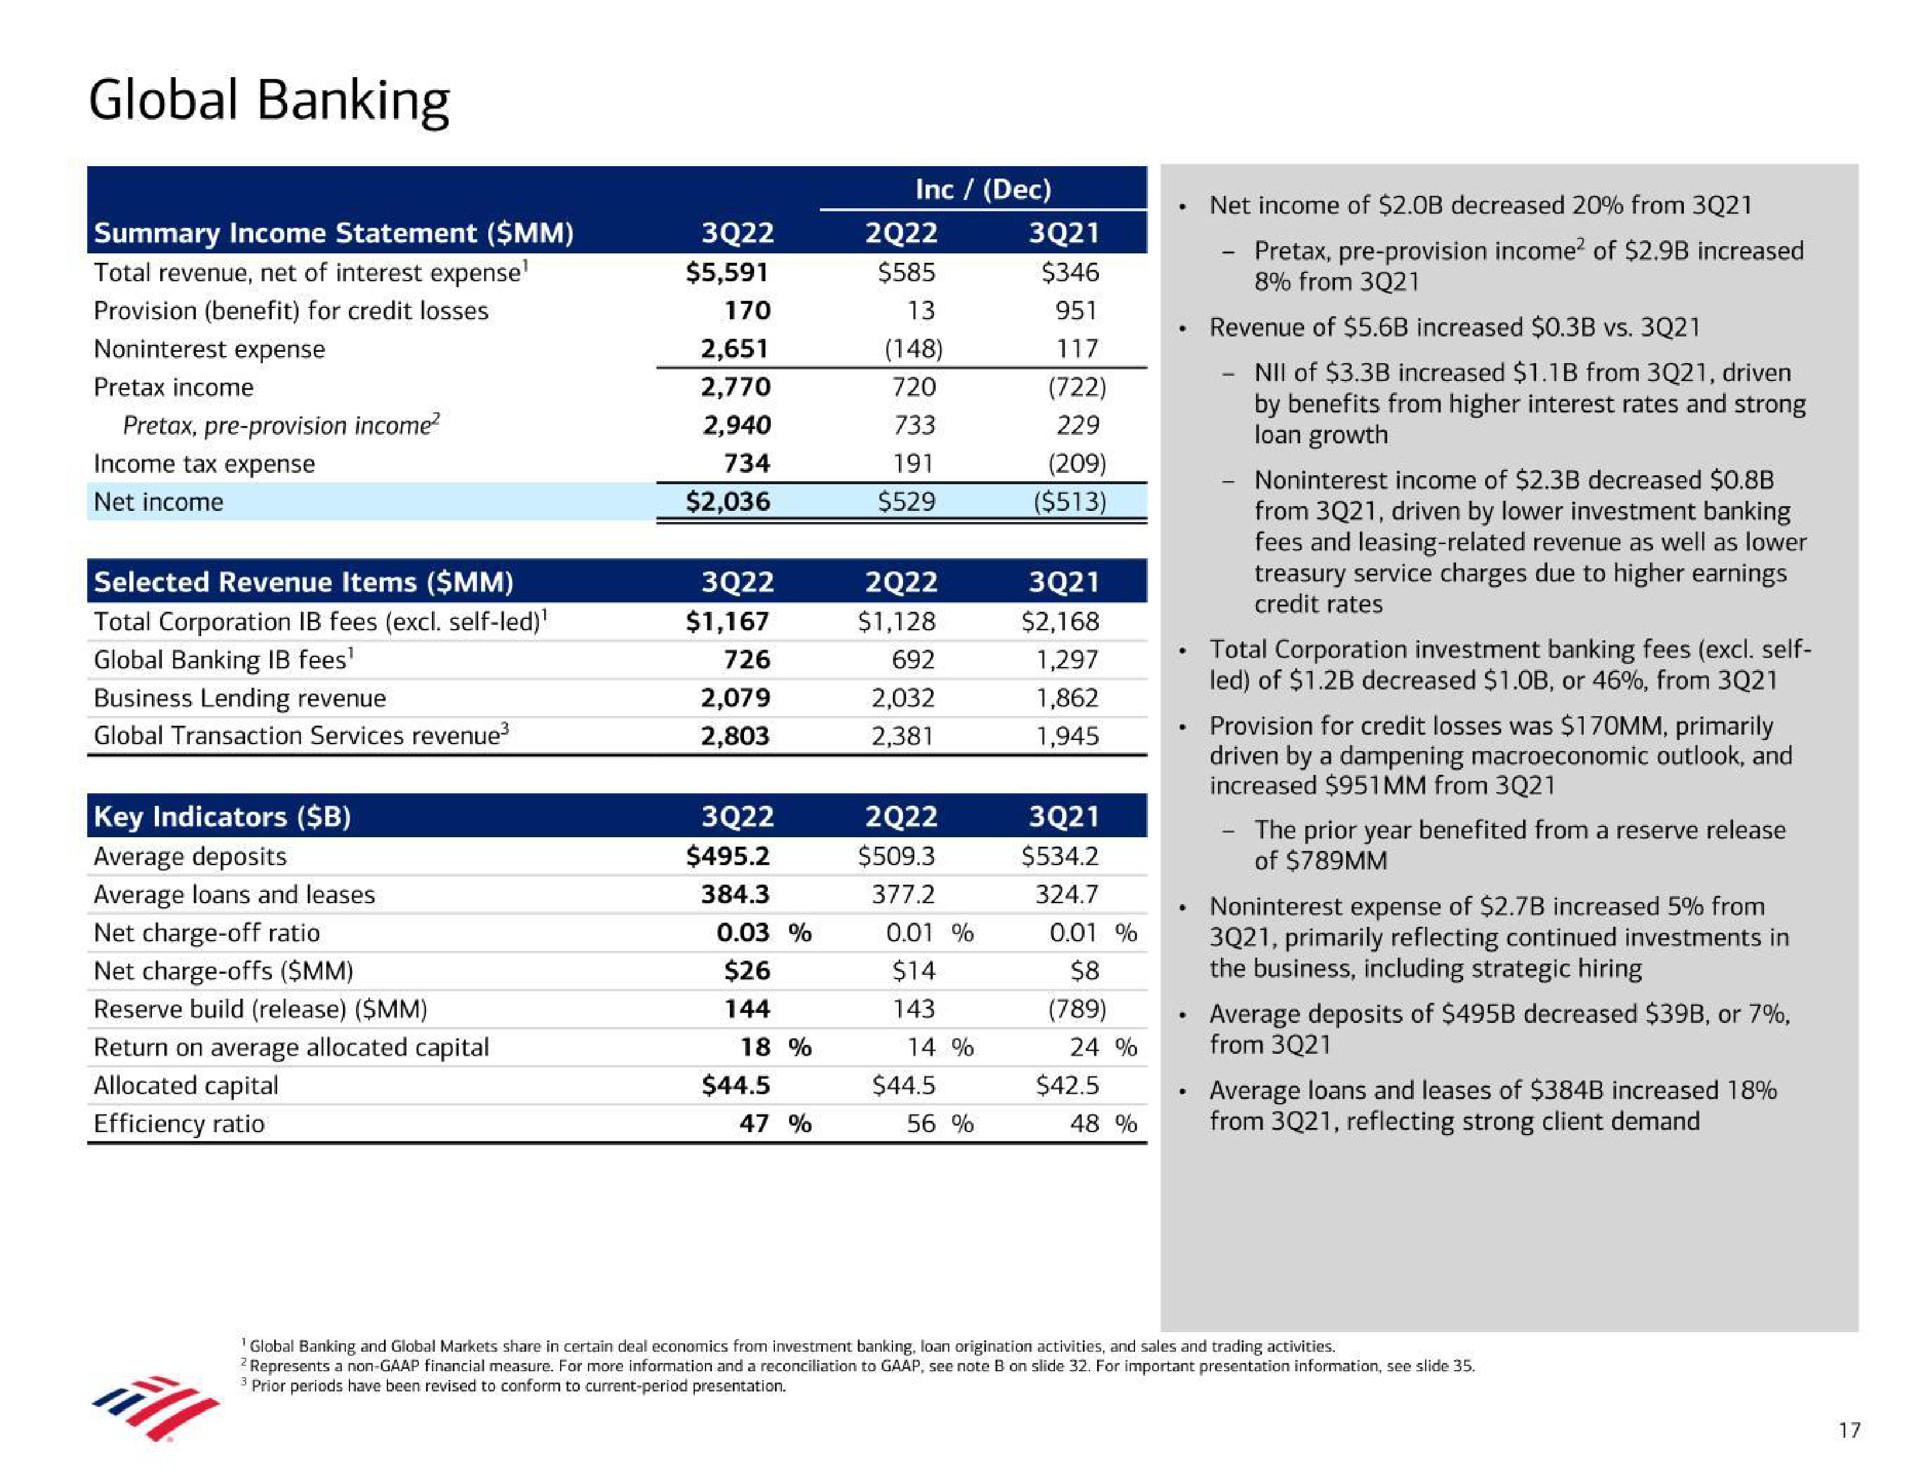 global banking net income global banking fees net charge off ratio net charge offs reserve build release from driven by lower investment banking primarily reflecting continued investments in the business including strategic hiring average deposits of decreased or | Bank of America